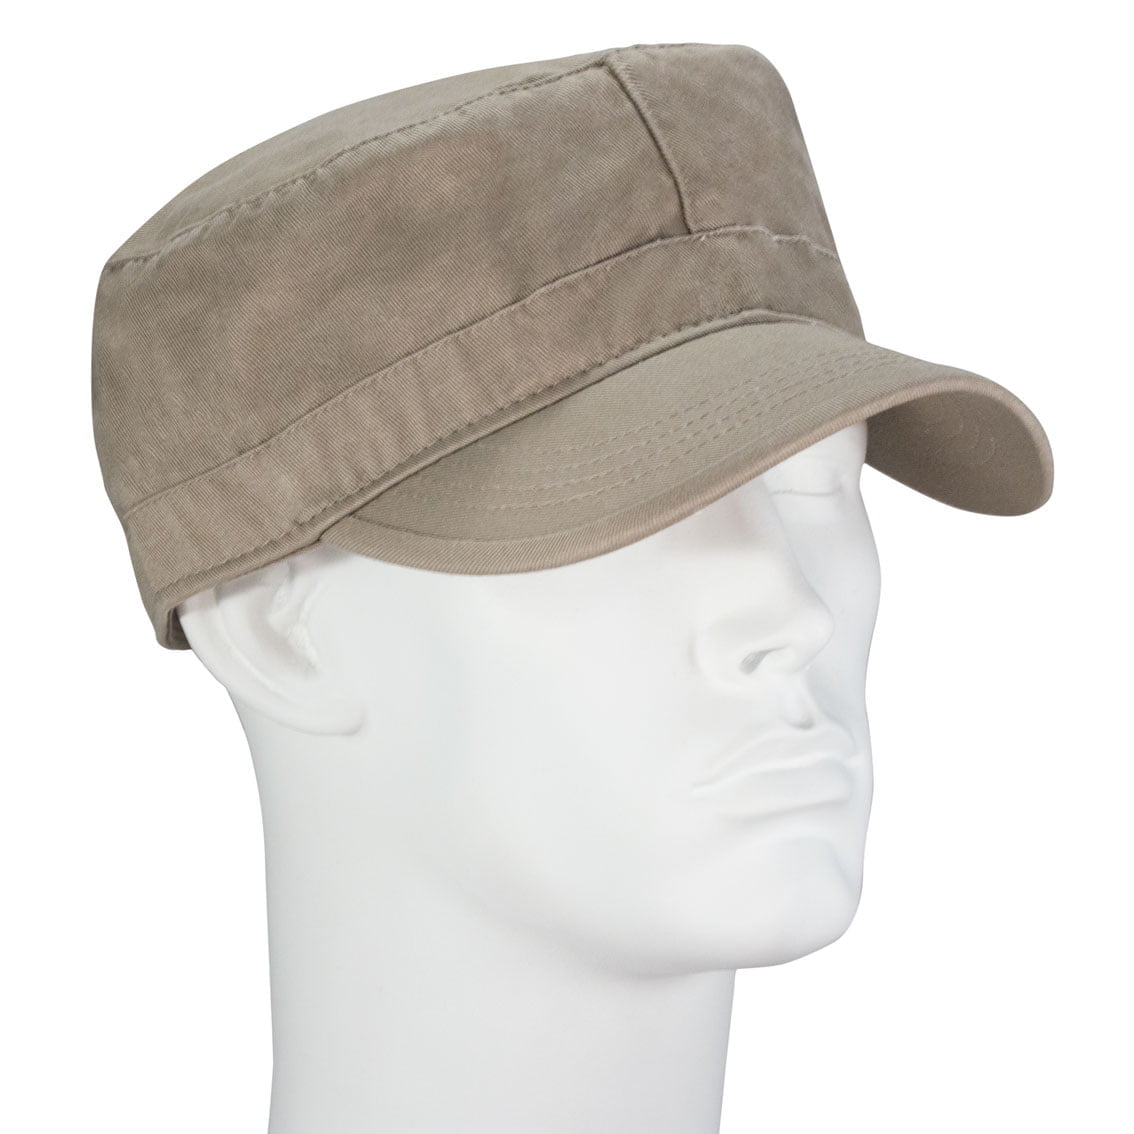 12pcs Khaki Solid Castro Military Fatigue Army Hats - Fitted - Unconstructed - 100% Cotton - Bulk by the Dozen - Wholesale